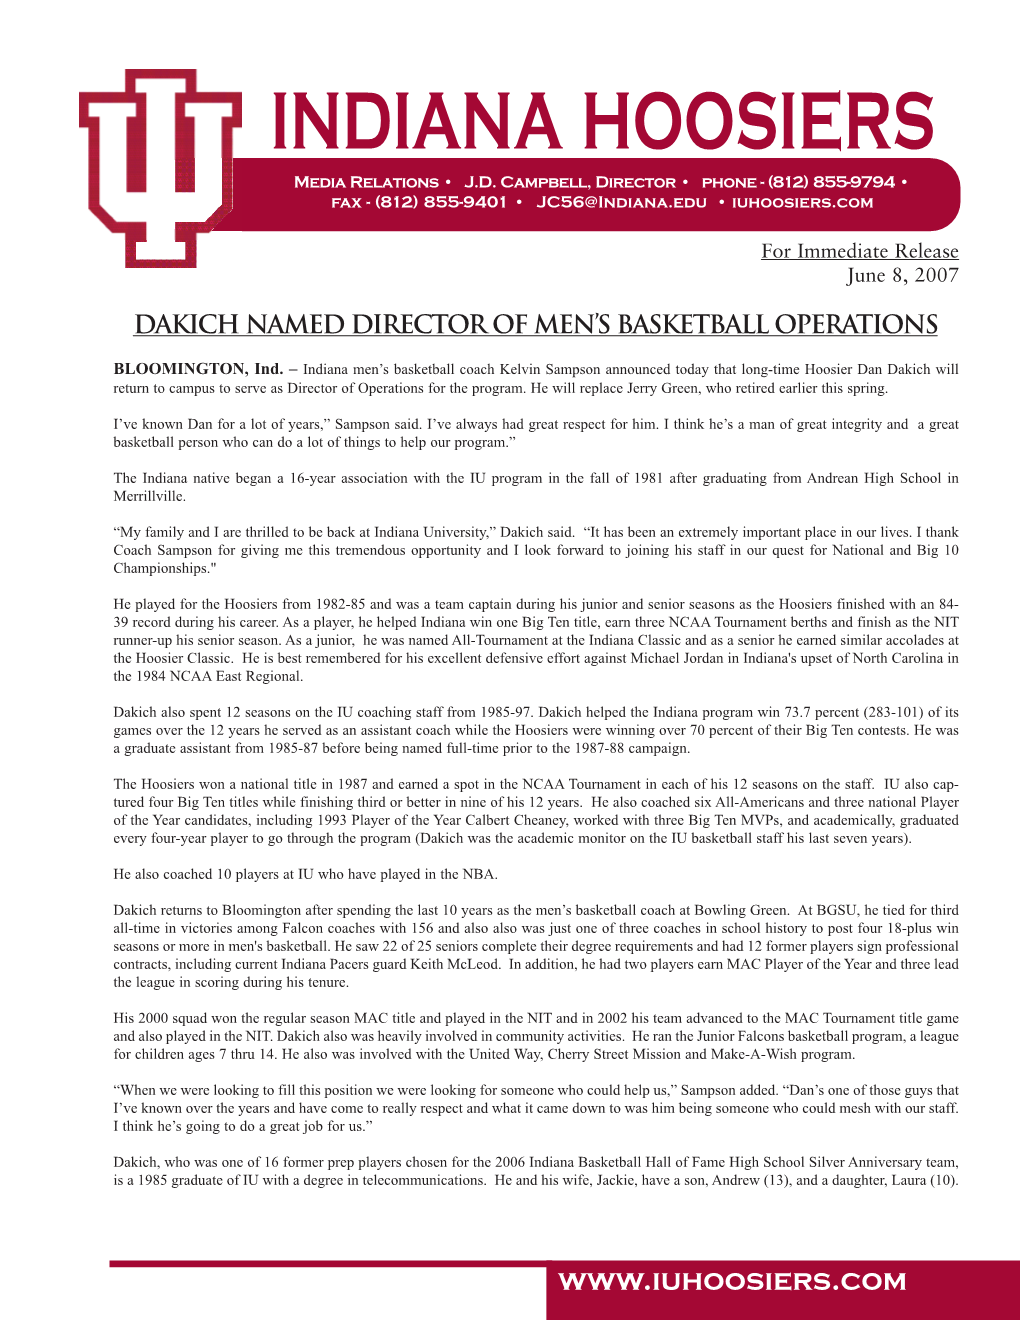 Dakich Named Director of Men's Basketball Operations